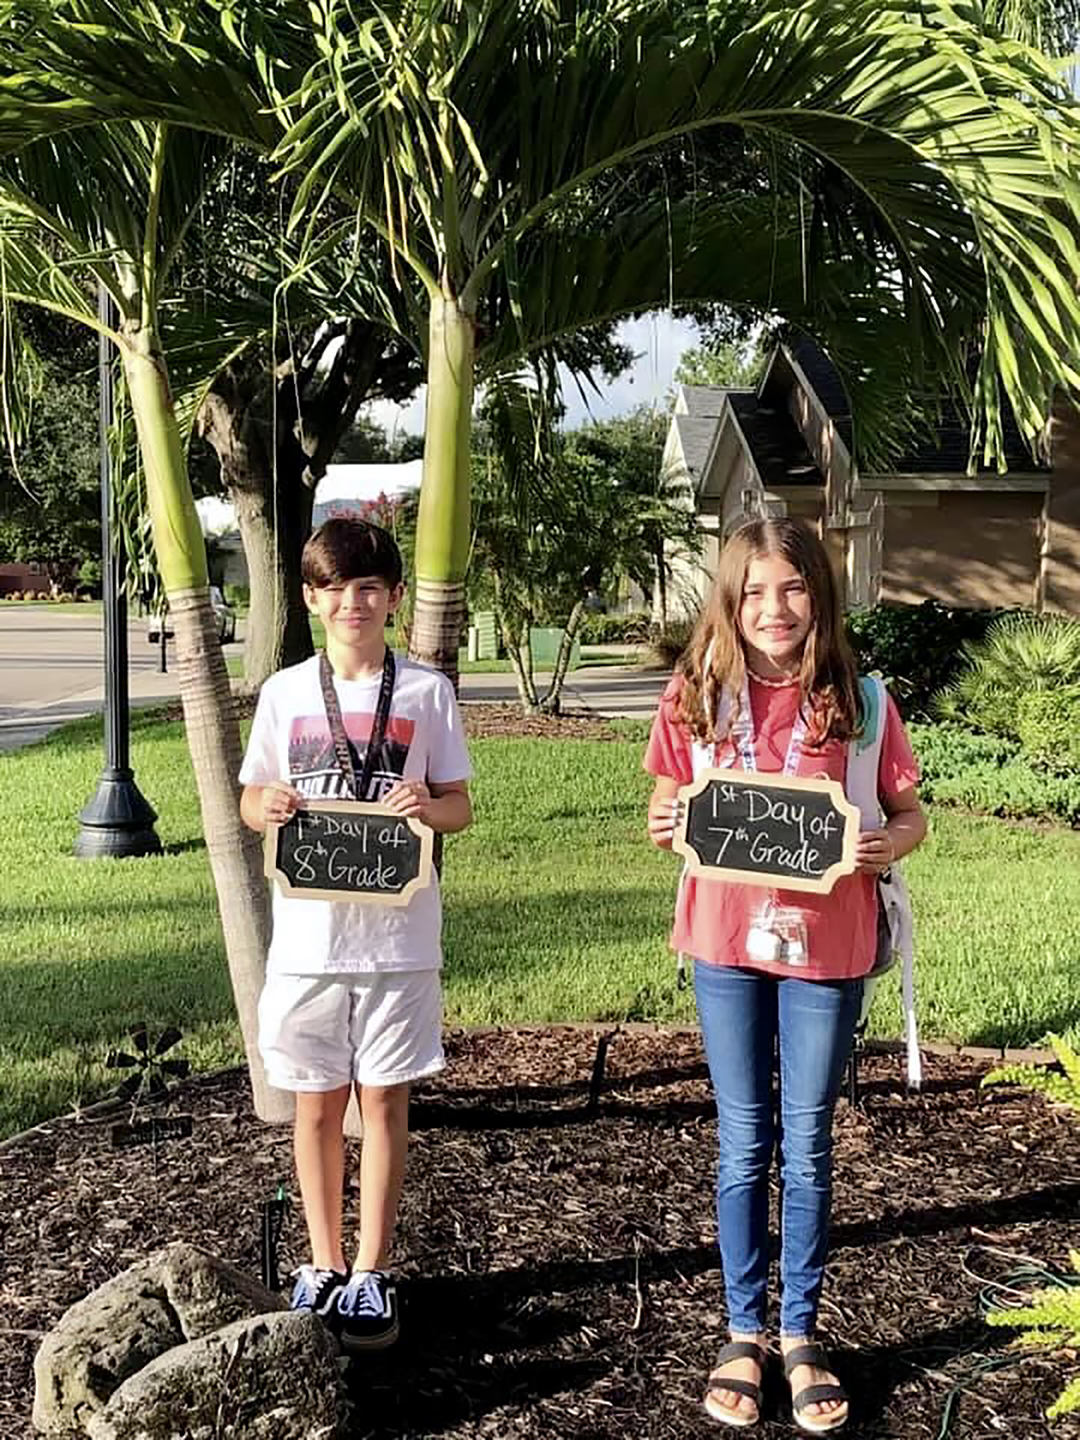 Nicolas Juliano and his sister, Isabella Juliano, know it's time to take photos on the first day of school when the chalkboards come out. Courtesy photo.